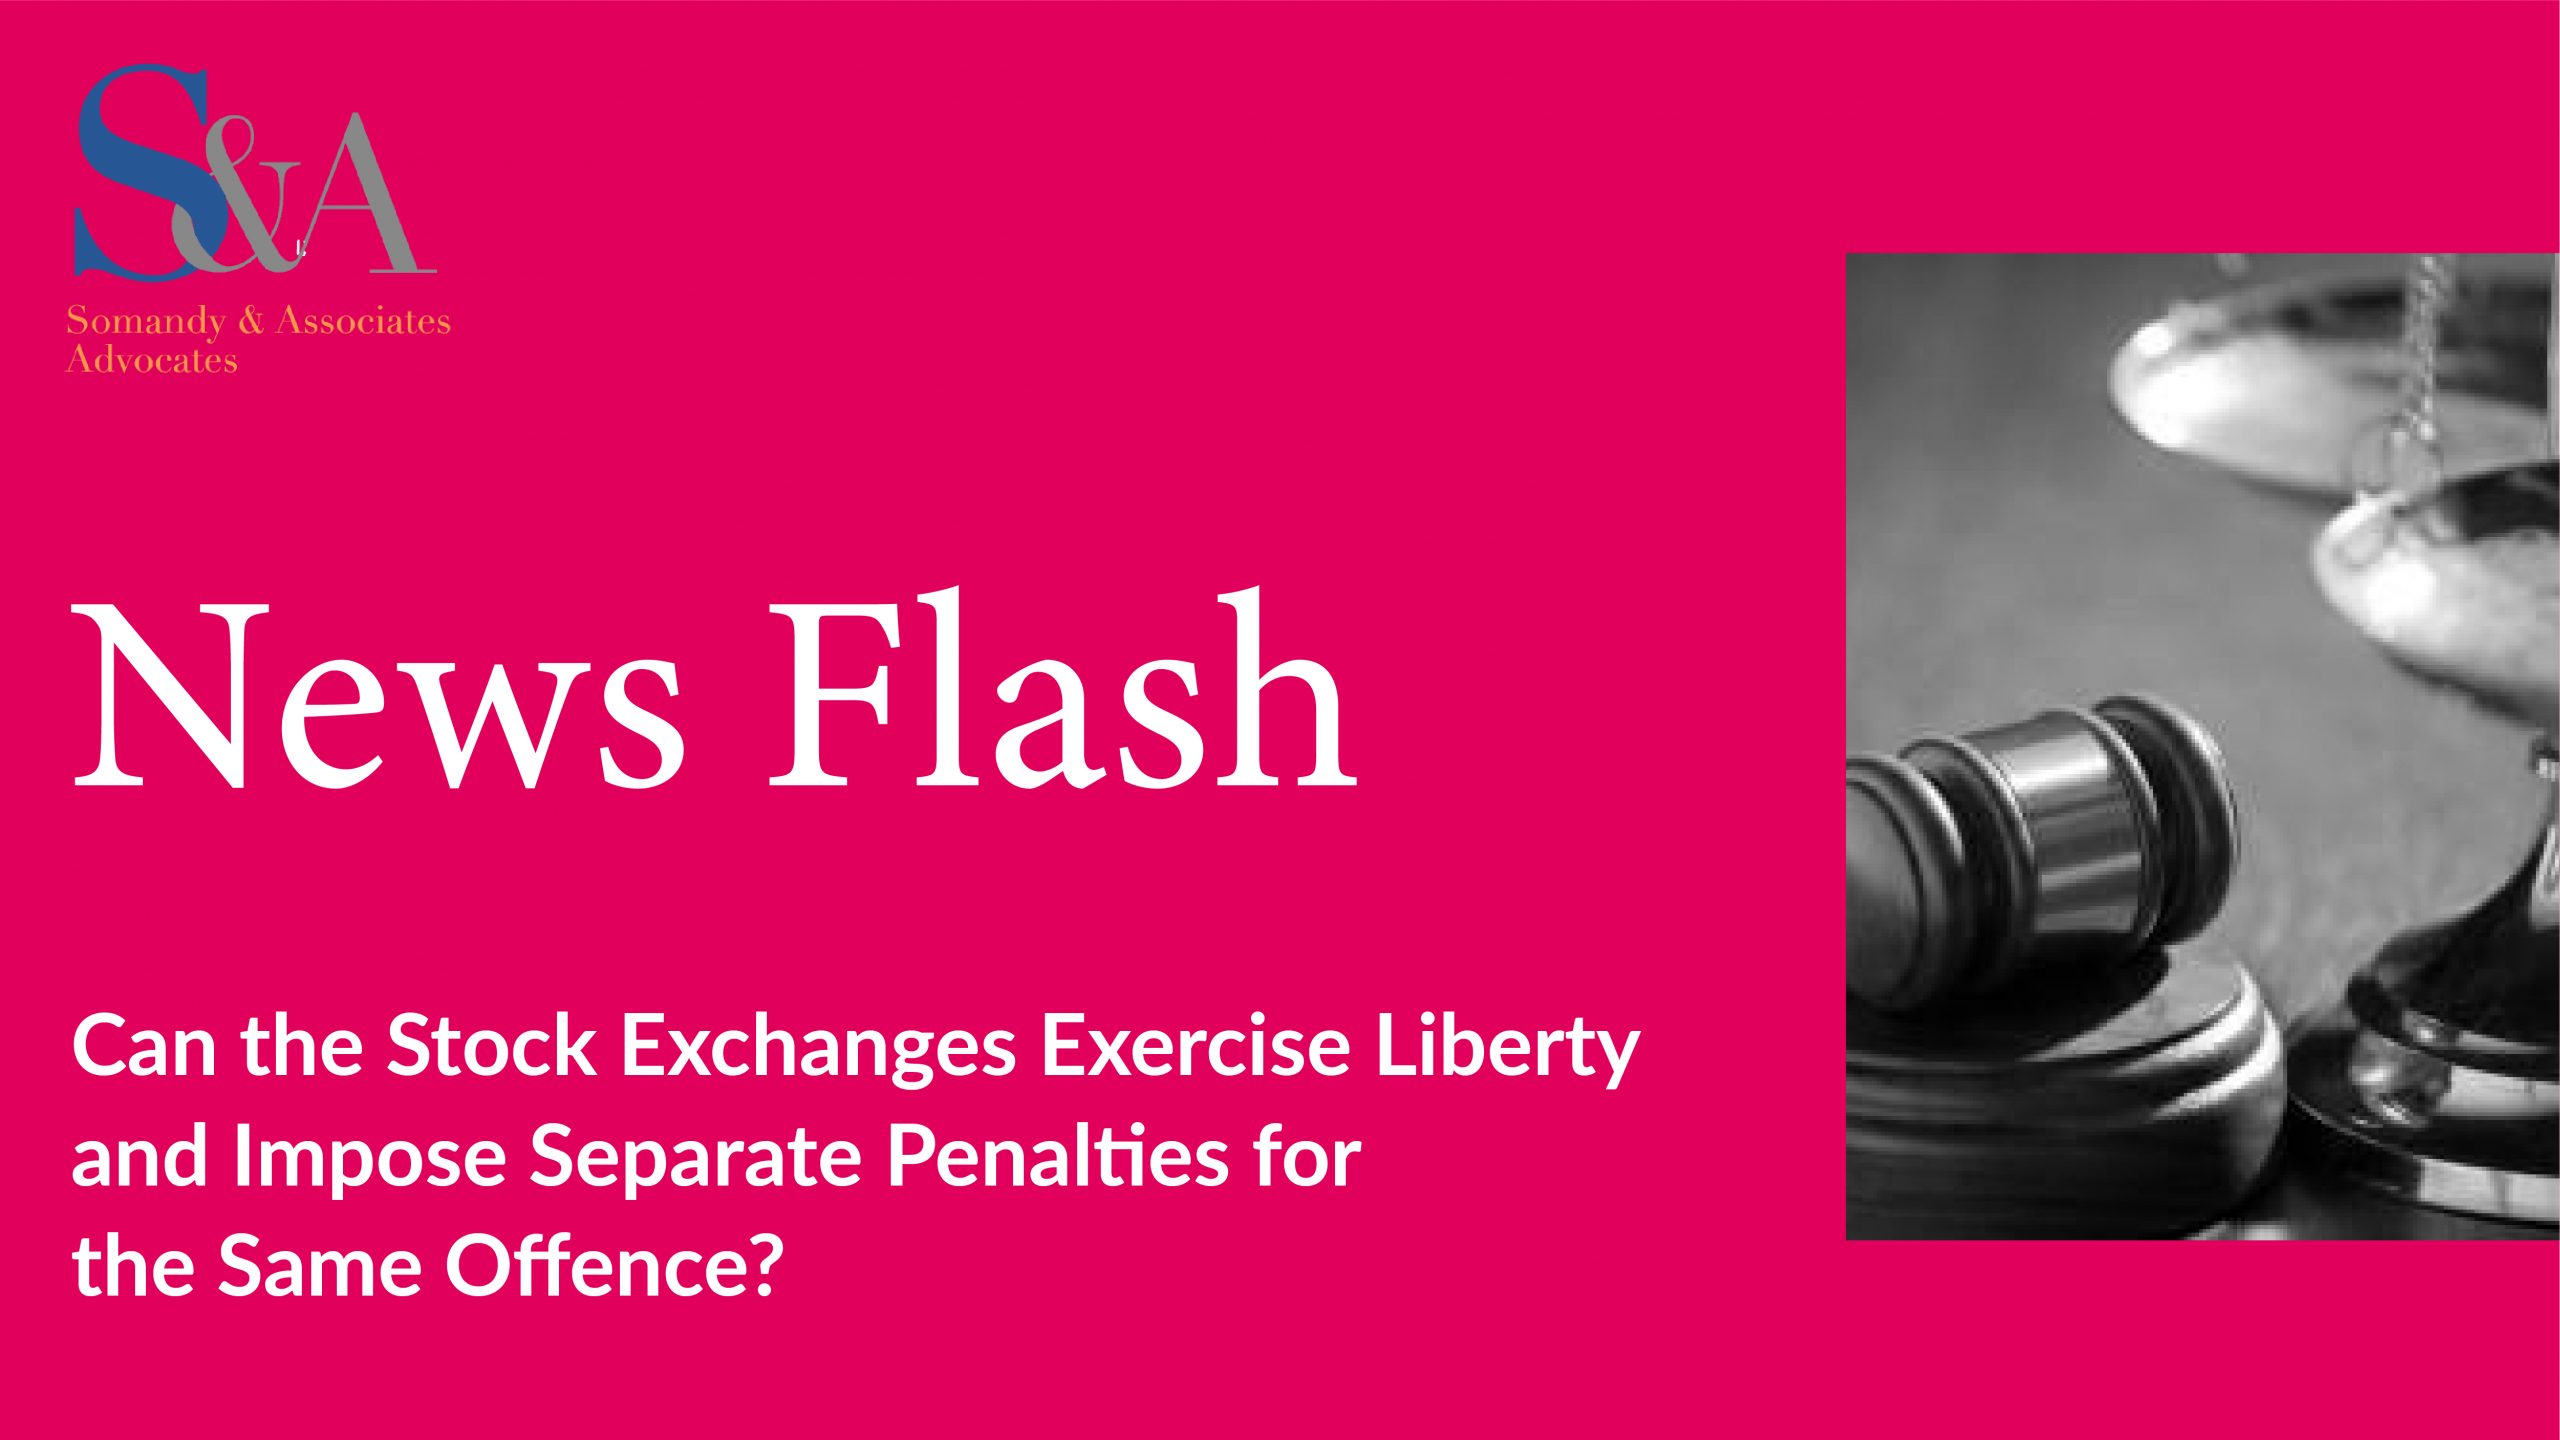 Can the Stock Exchanges Exercise Liberty and Impose Separate Penalties for the Same Offence?